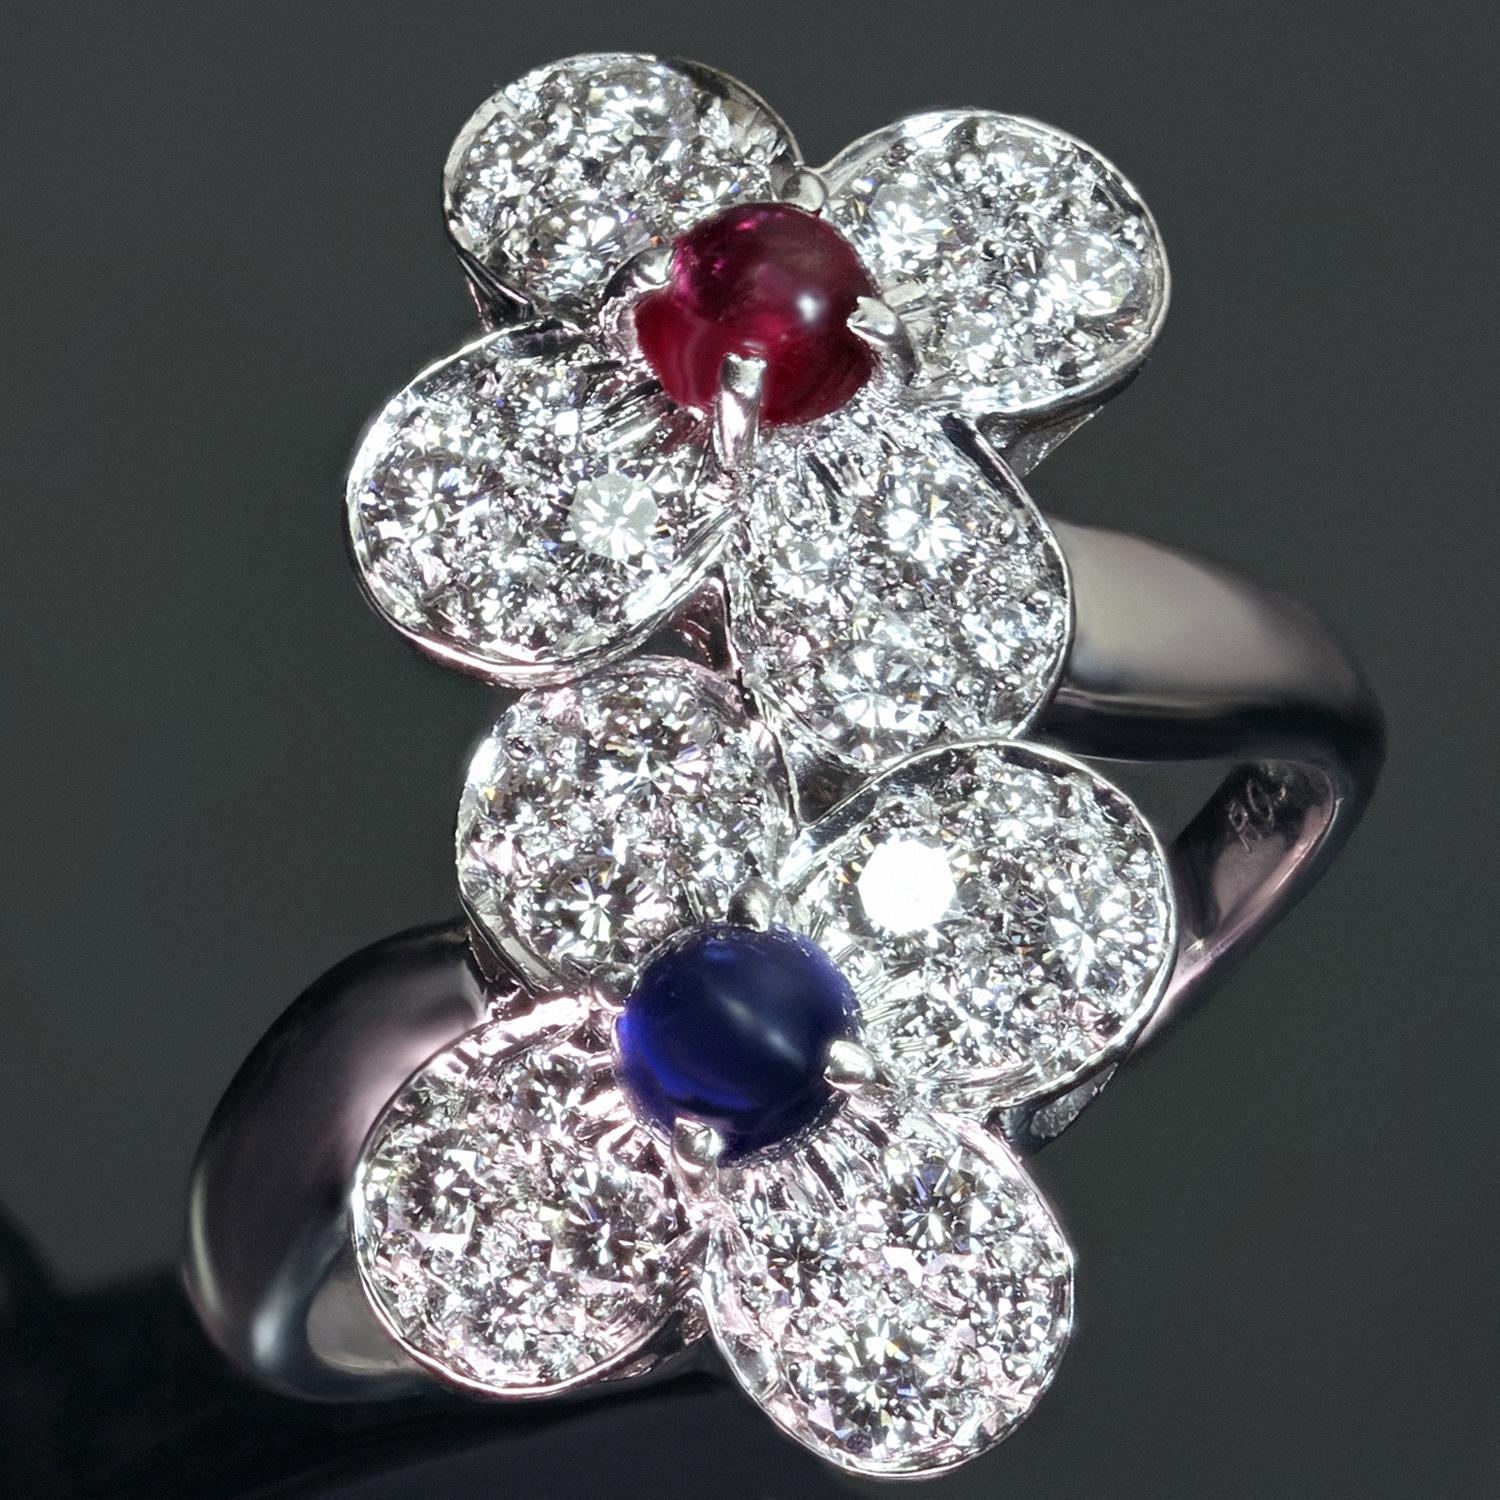 This stunning Van Cleefs & Arpels ring from the classic Trefle collection is crafted in 18k white gold and features a double clover flower motif set with a round cabochon blue sapphire and red ruby and round brilliant D-F VVS1-VVS2 diamonds weighing